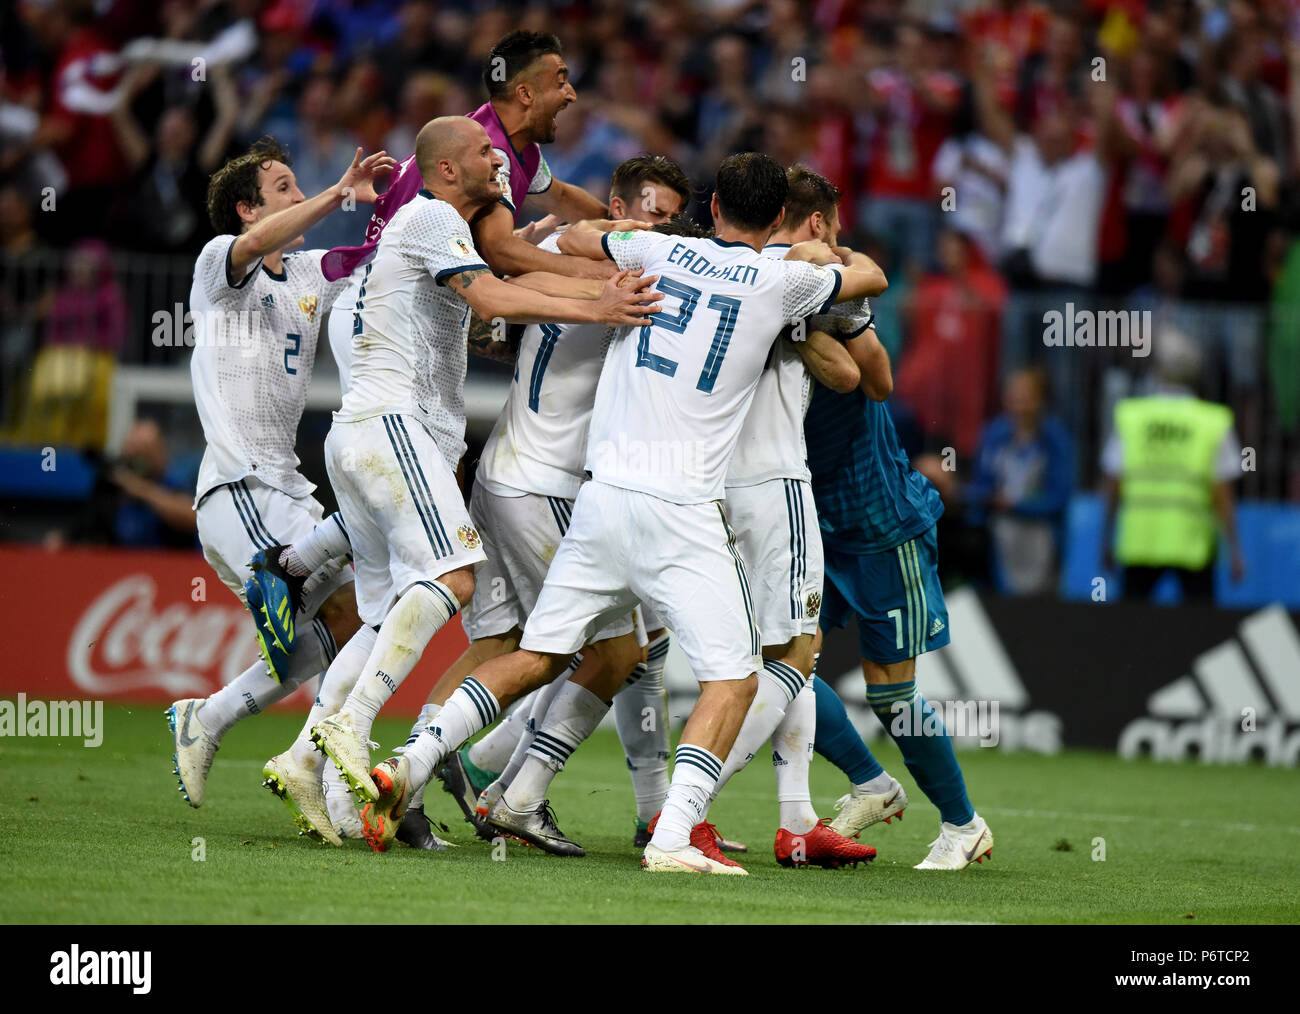 Moscow, Russia - July 1, 2018. Russian national team celebrating qualification to World Cup 2018 quarterfinals after penalty shootout in match against Stock Photo